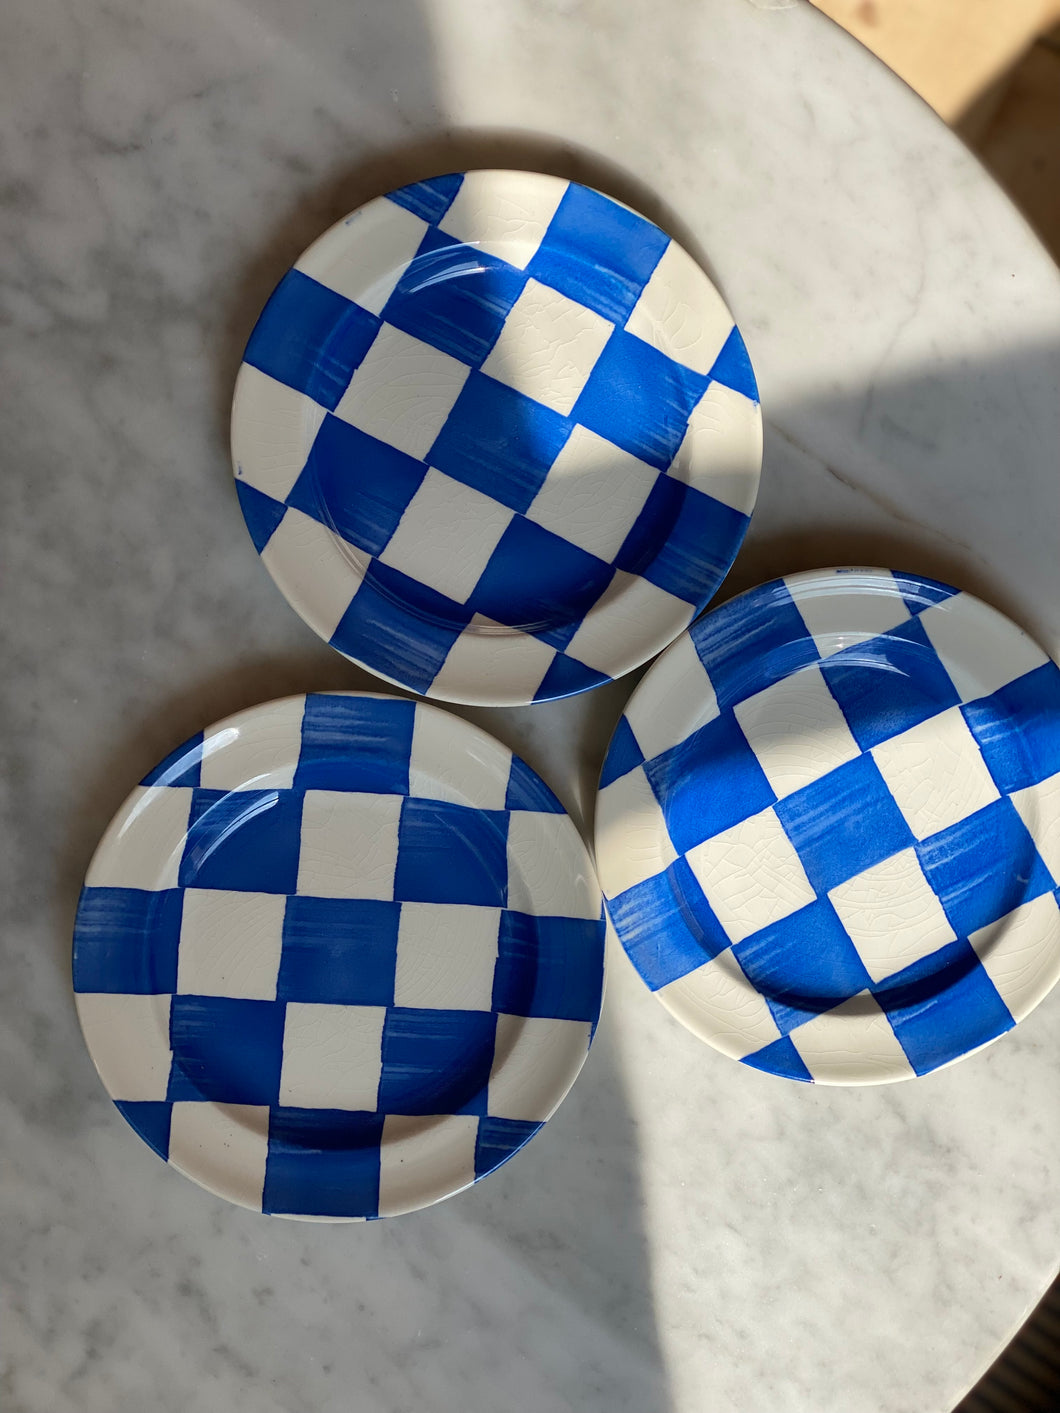 Blue Chequered Side Plates